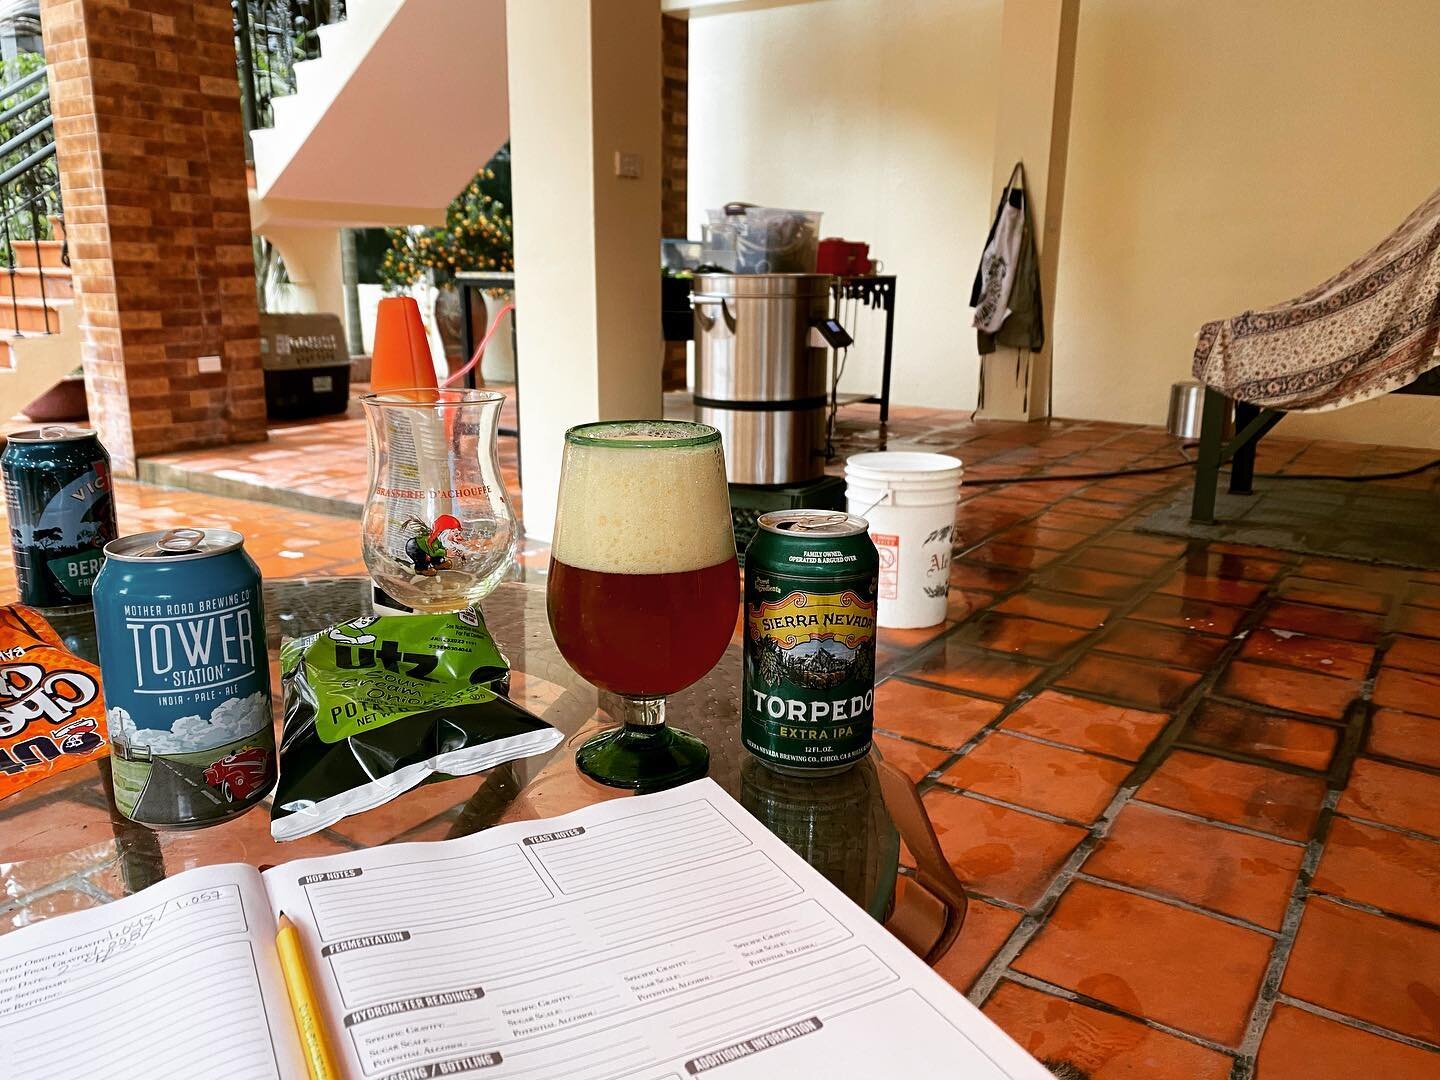 Successful second homebrew day in Hanoi! Not sure many torpedoes have been enjoyed here before! #beer #homebrew #hanoi #vietnam #sierranevada